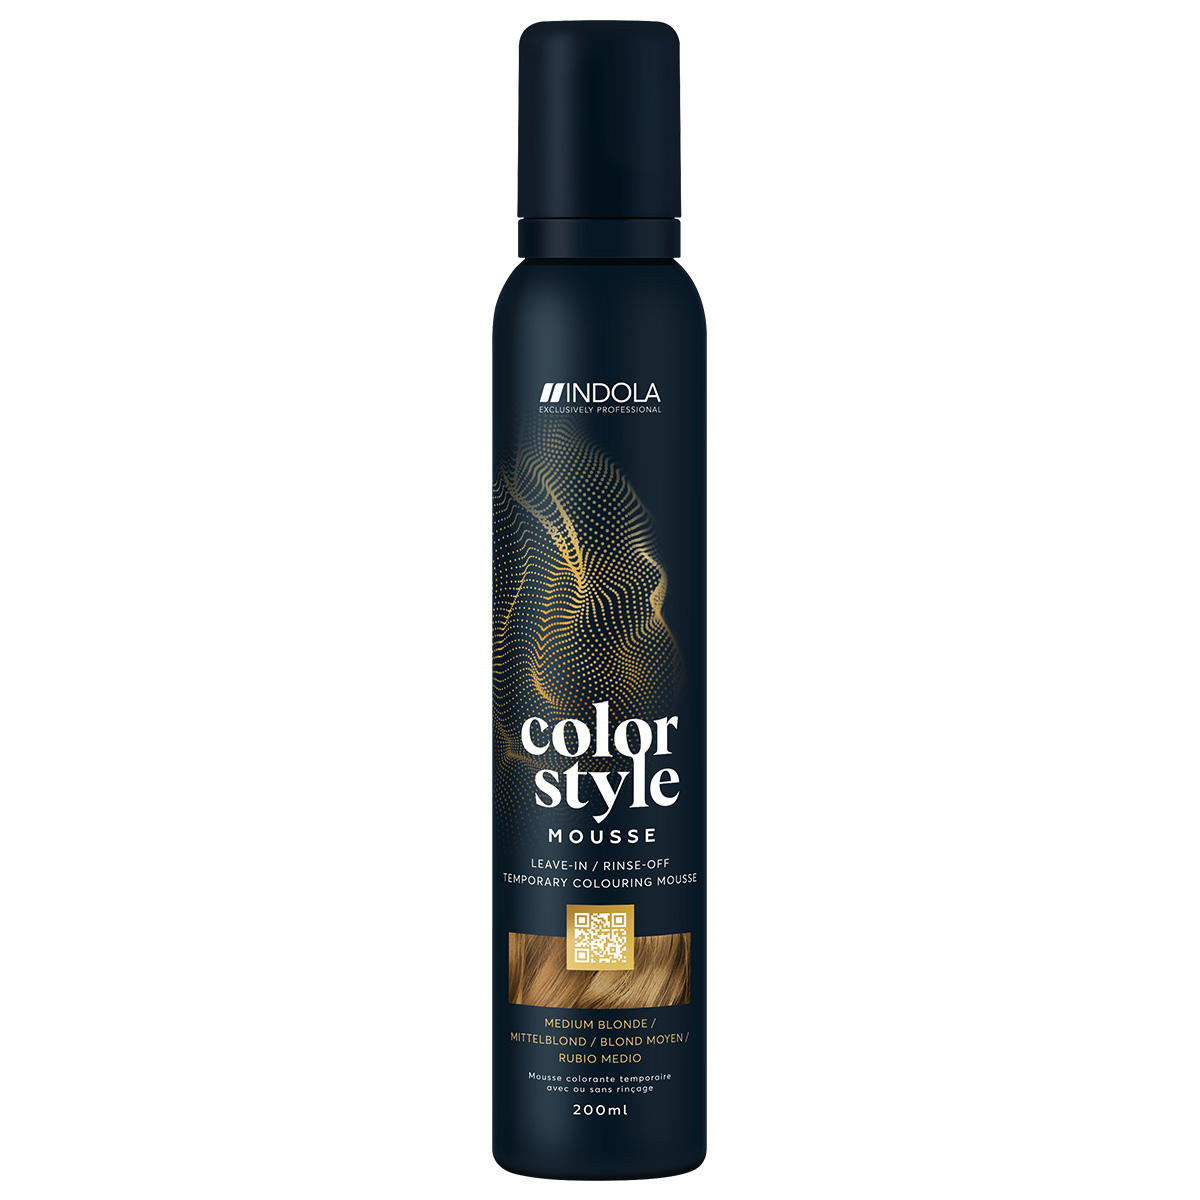 Indola Profession Color Style Mousse Mittelblond 200 ml - 1